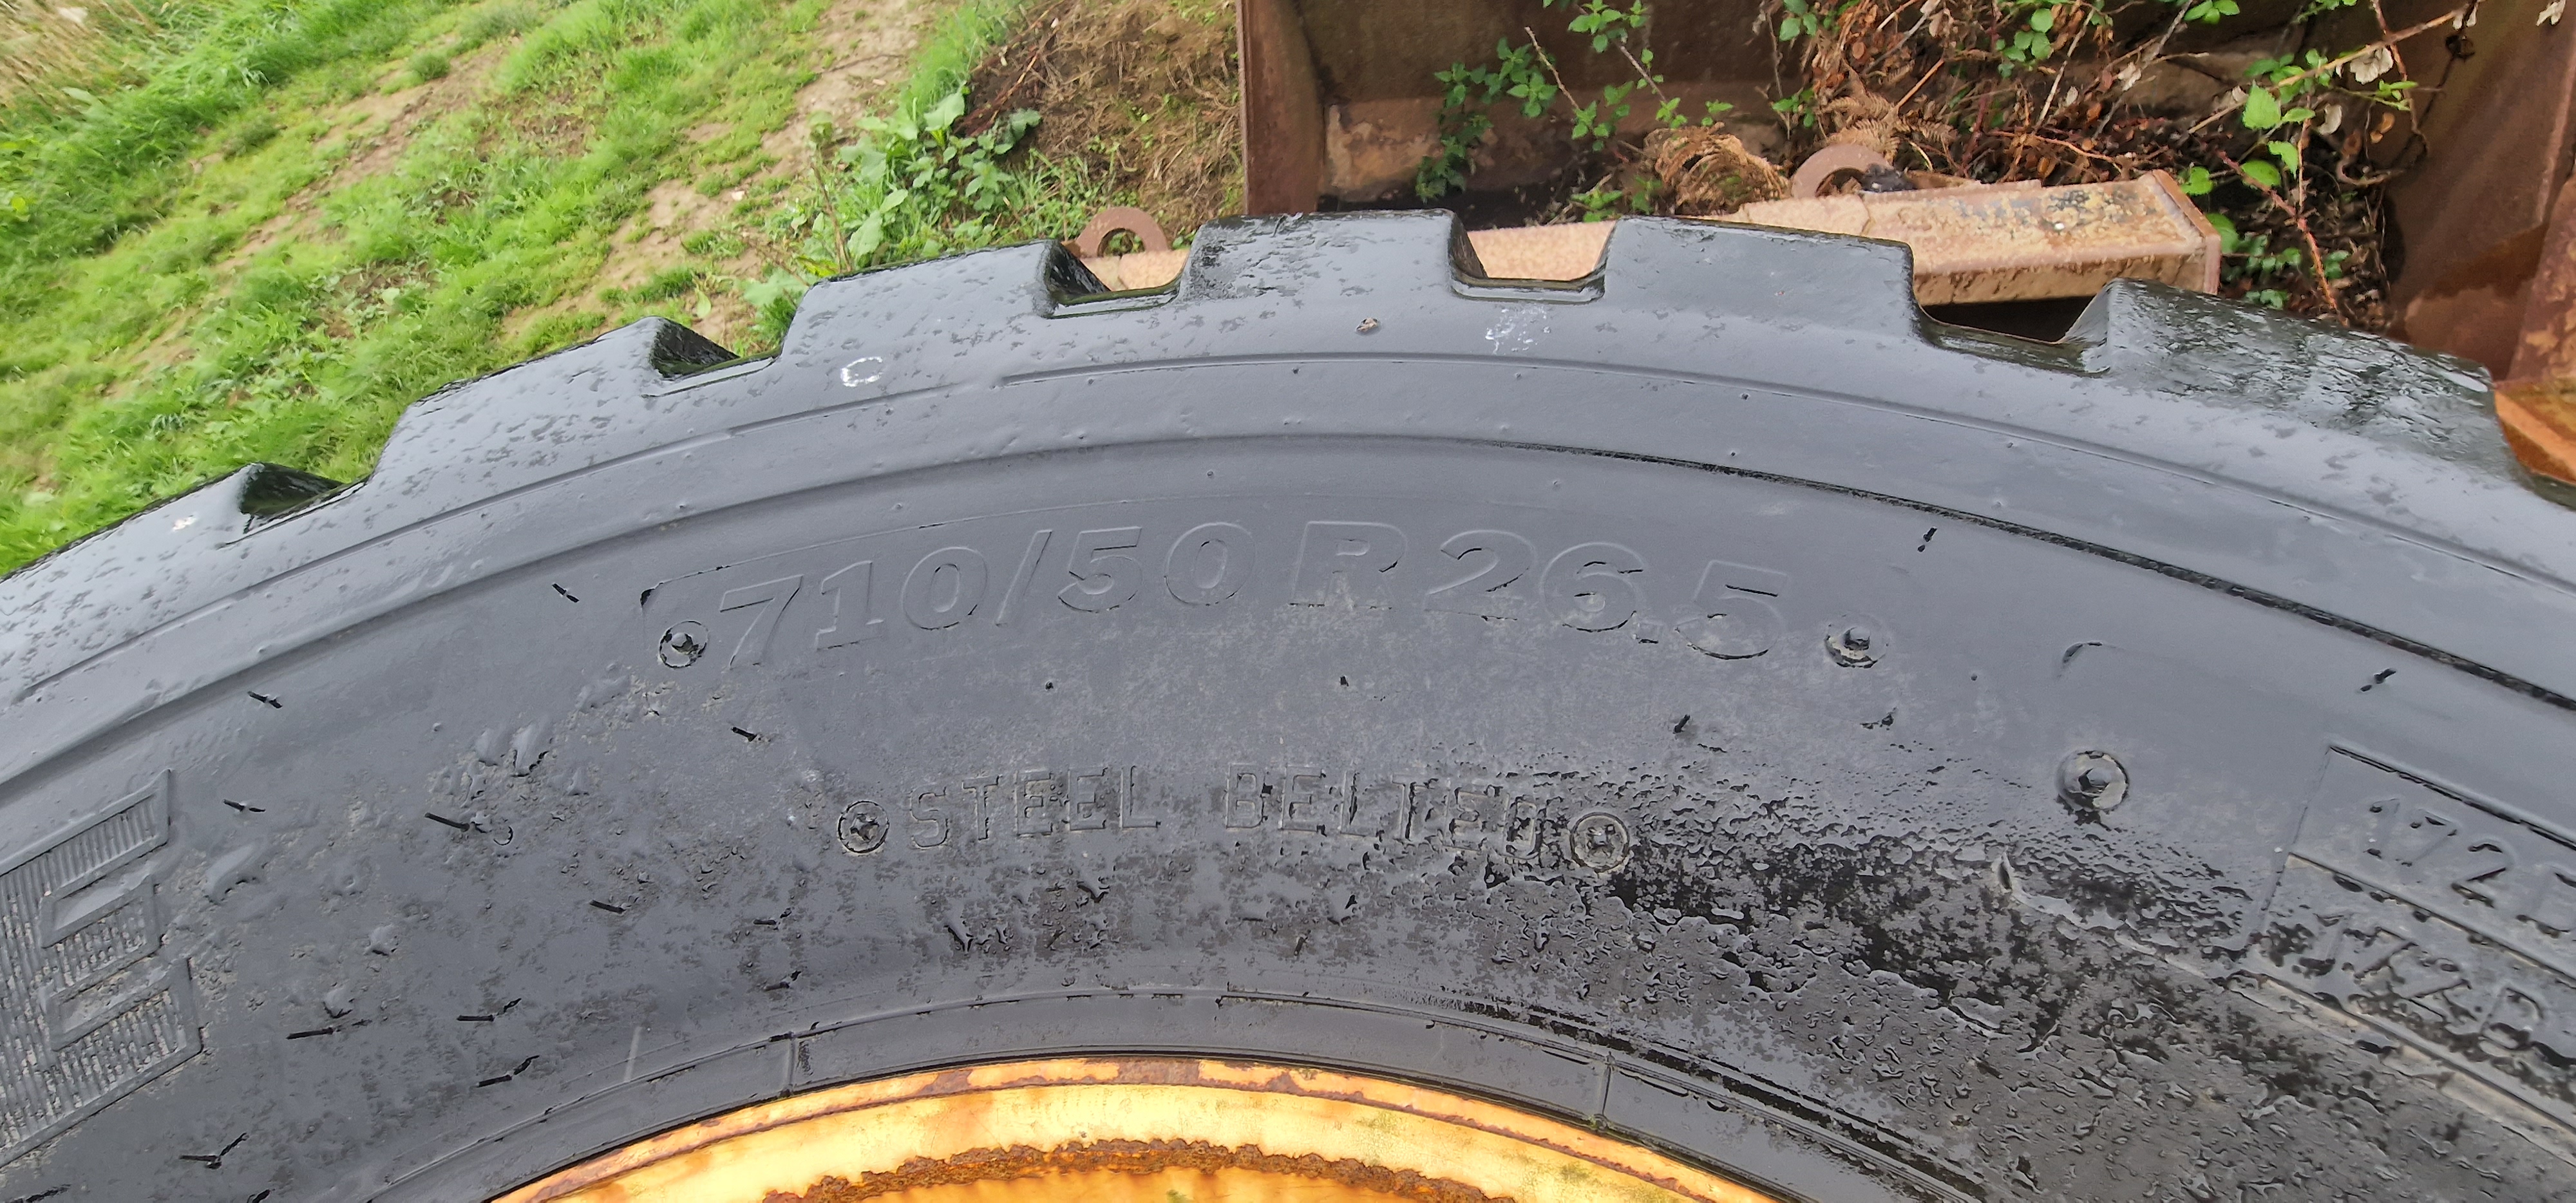 2 Alliance turf tyres + 4 JD wheels for sale